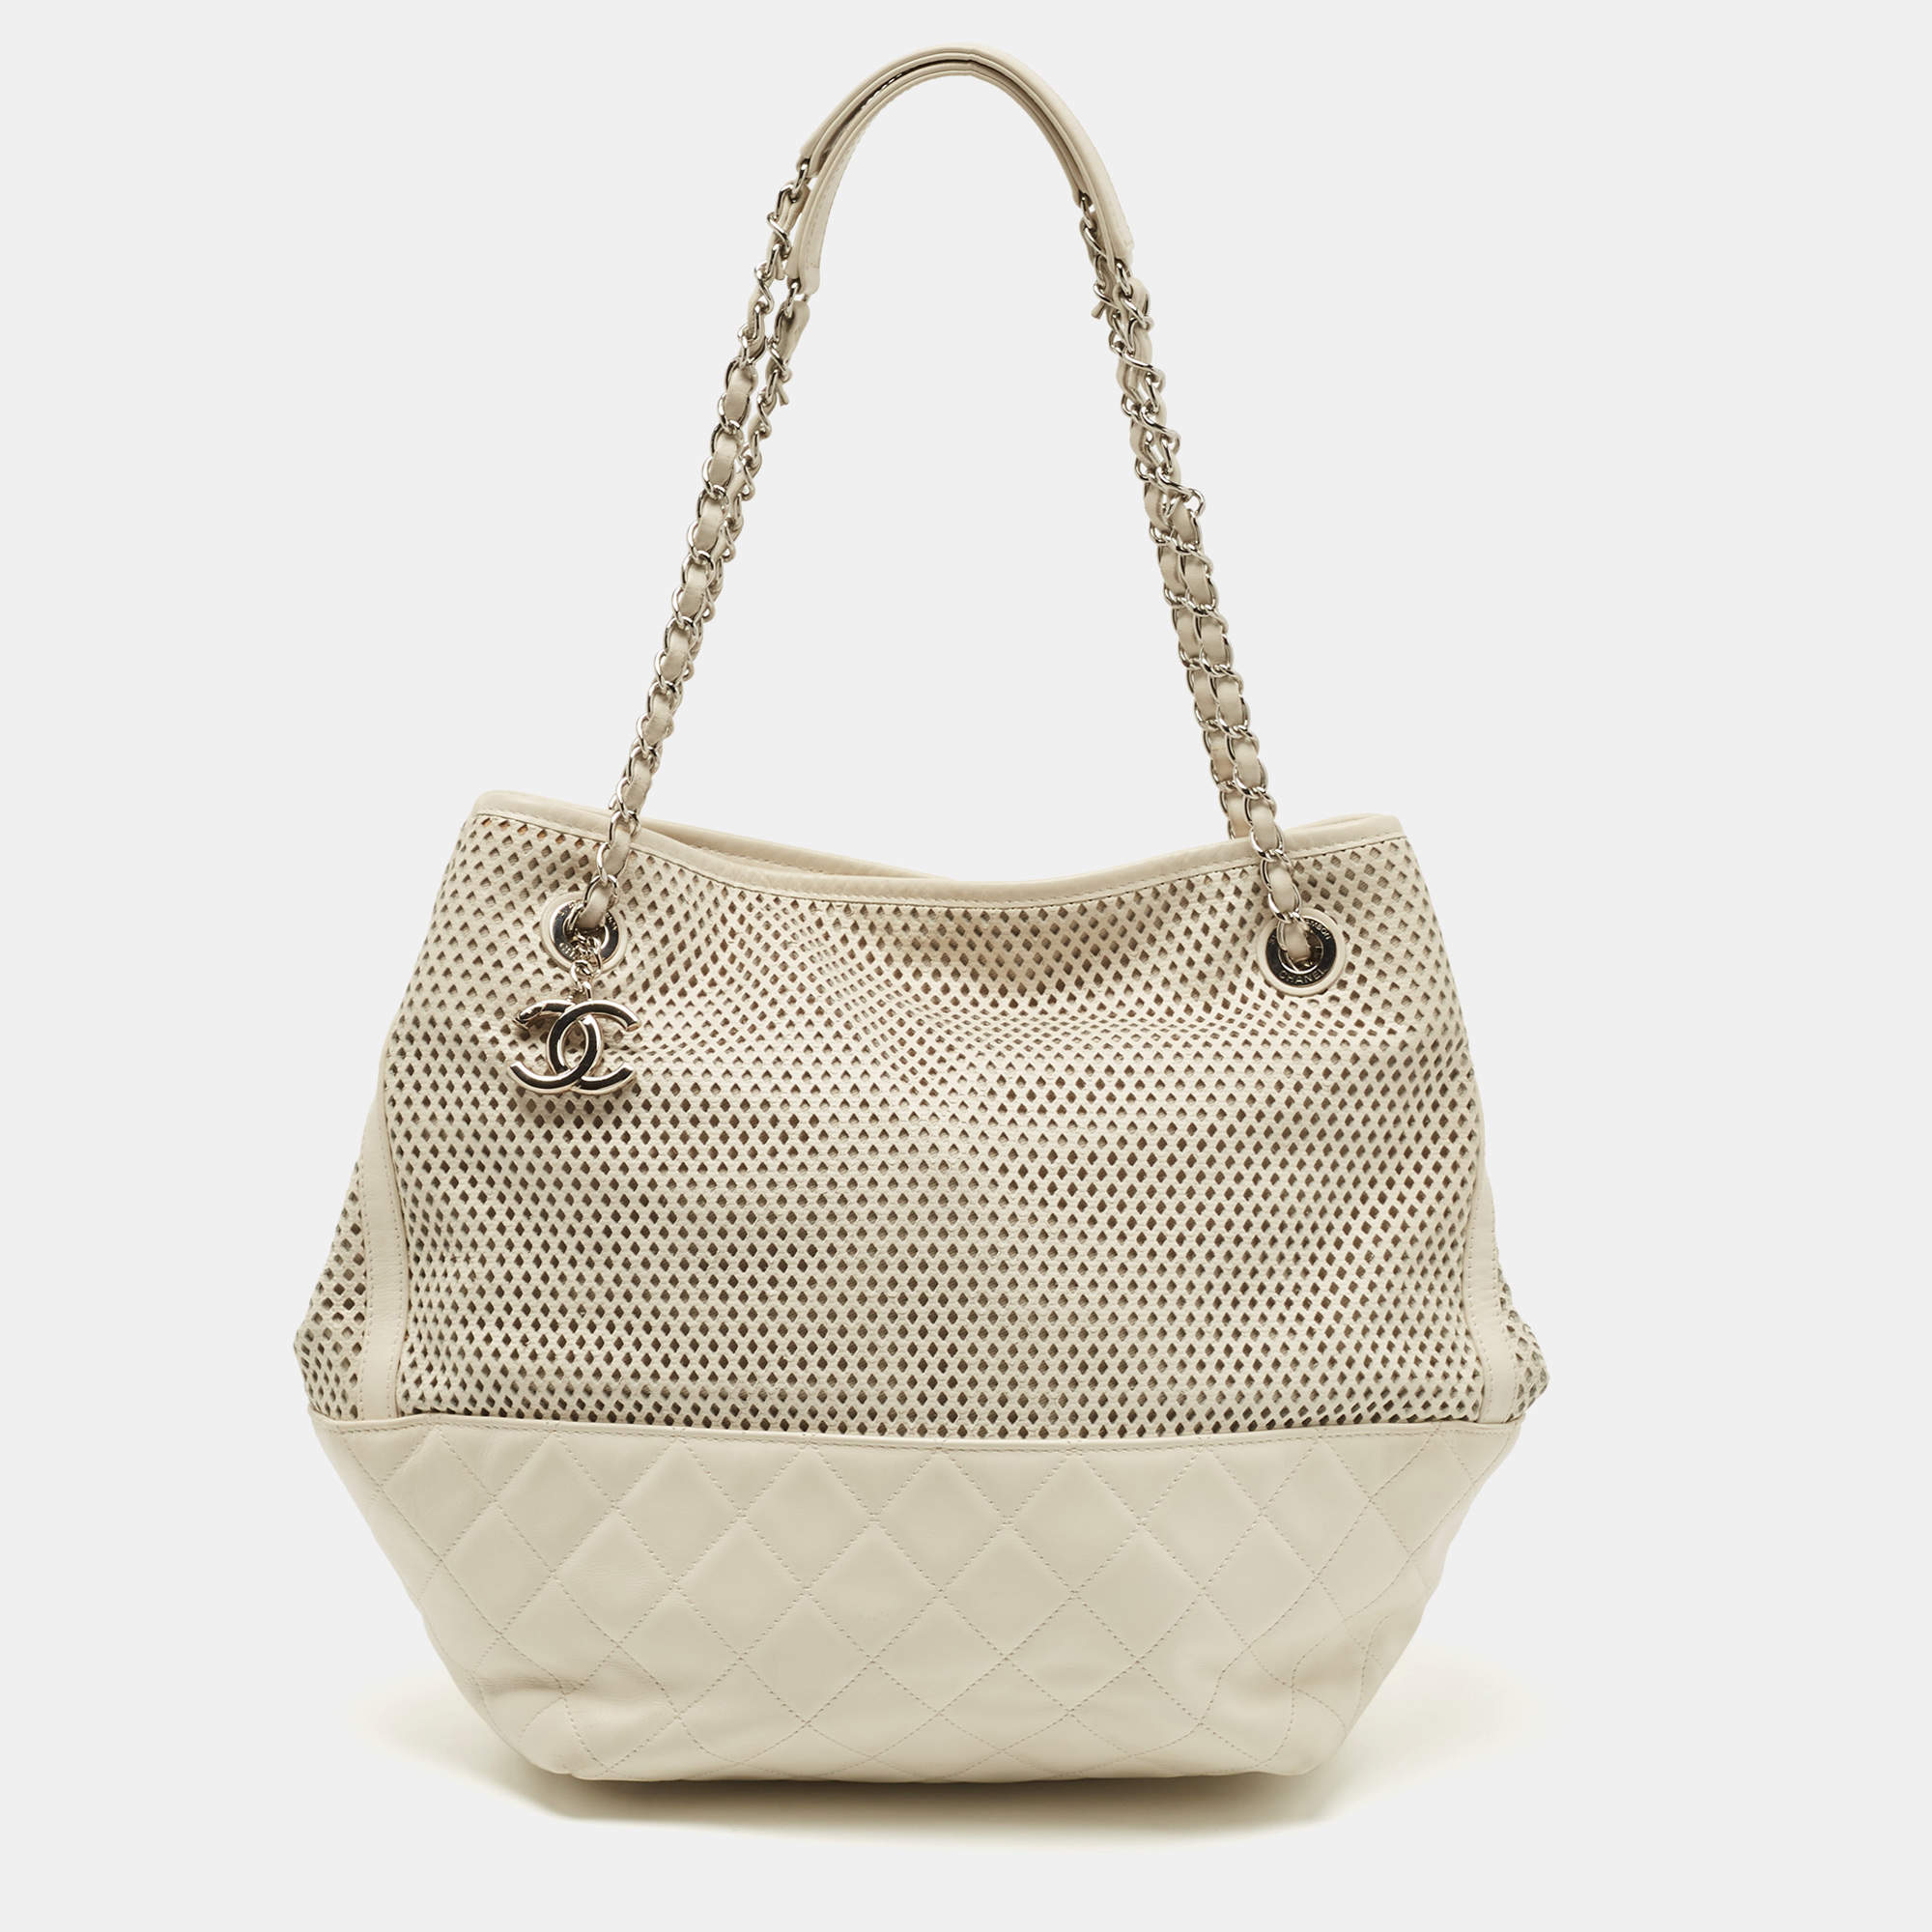 Chanel Cream Perforated Leather Up In The Air Tote